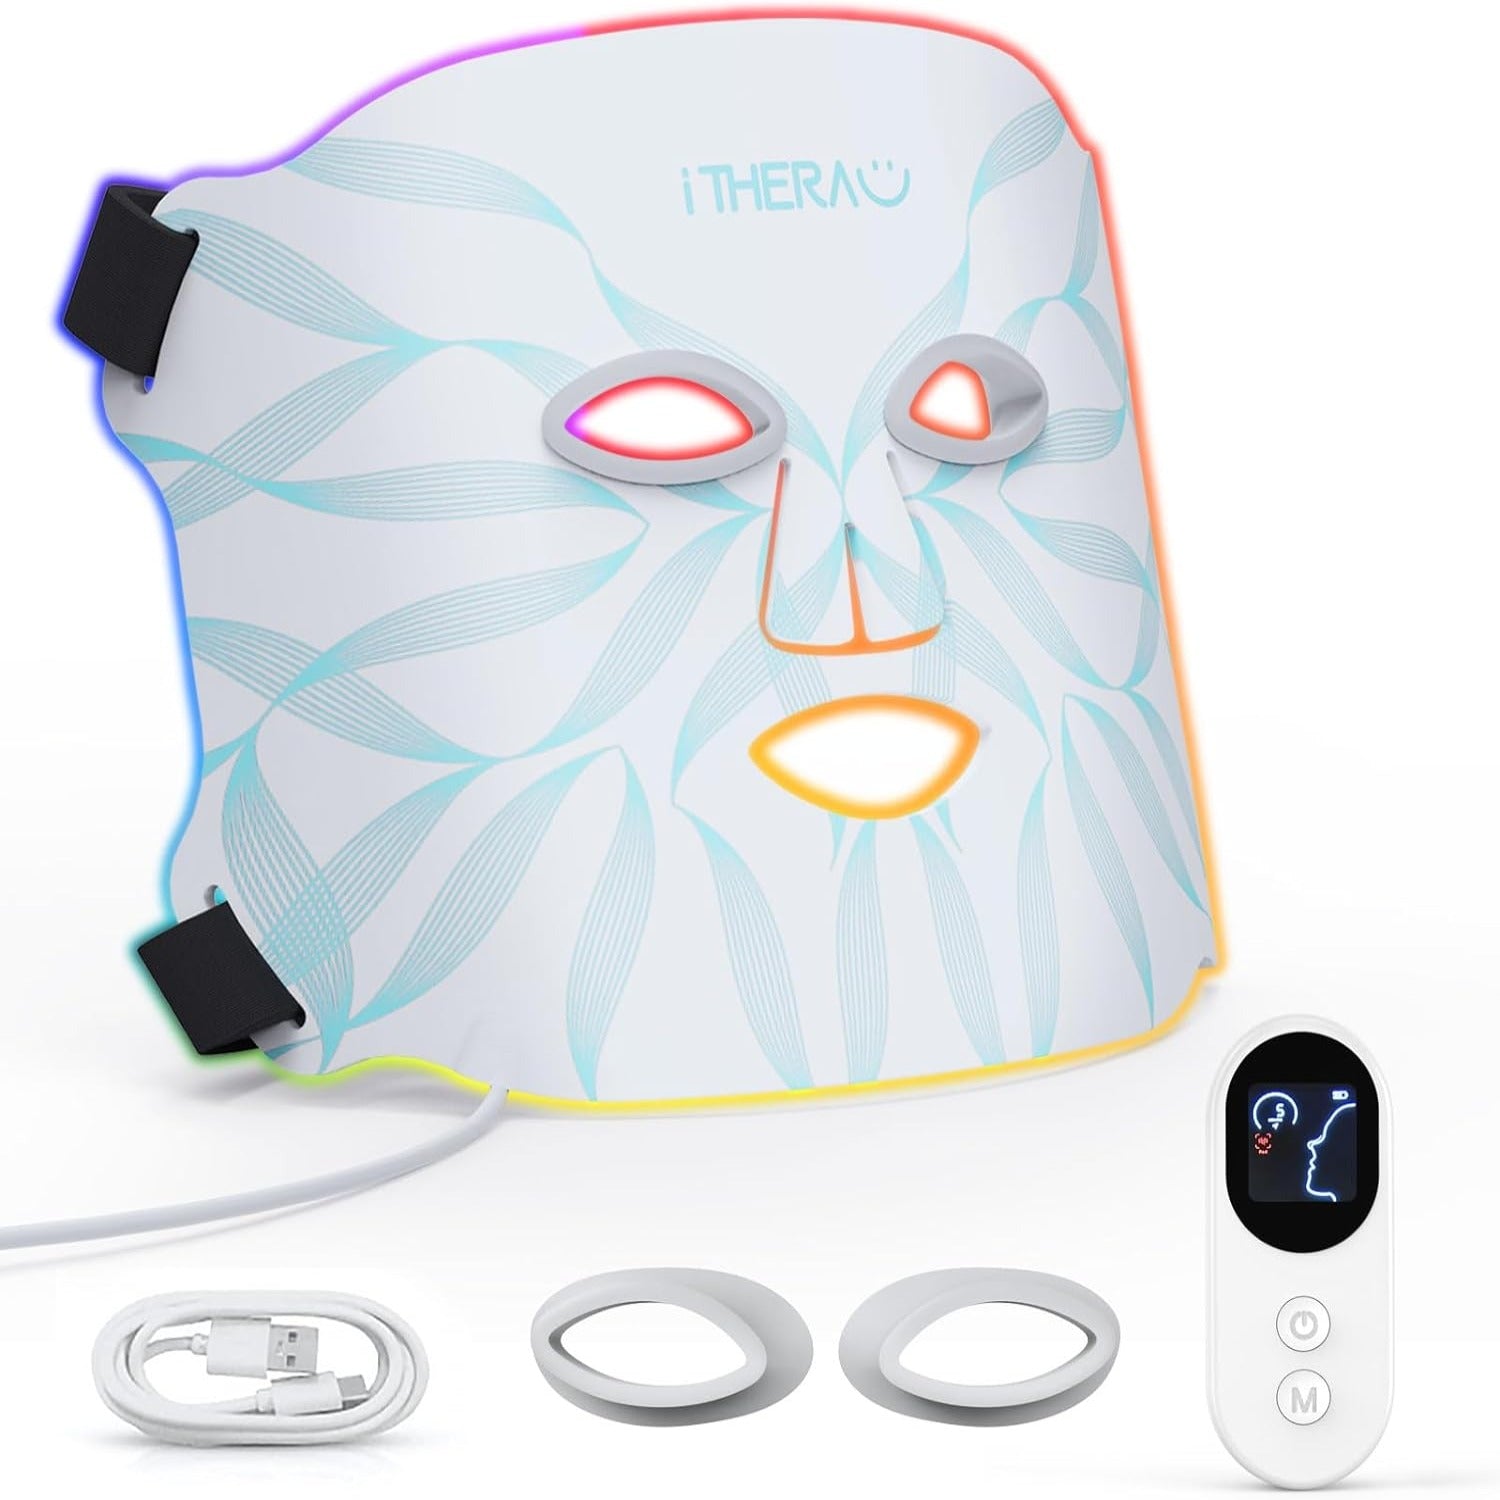 Itherau Skin Led Light Therapy Face Mask Red